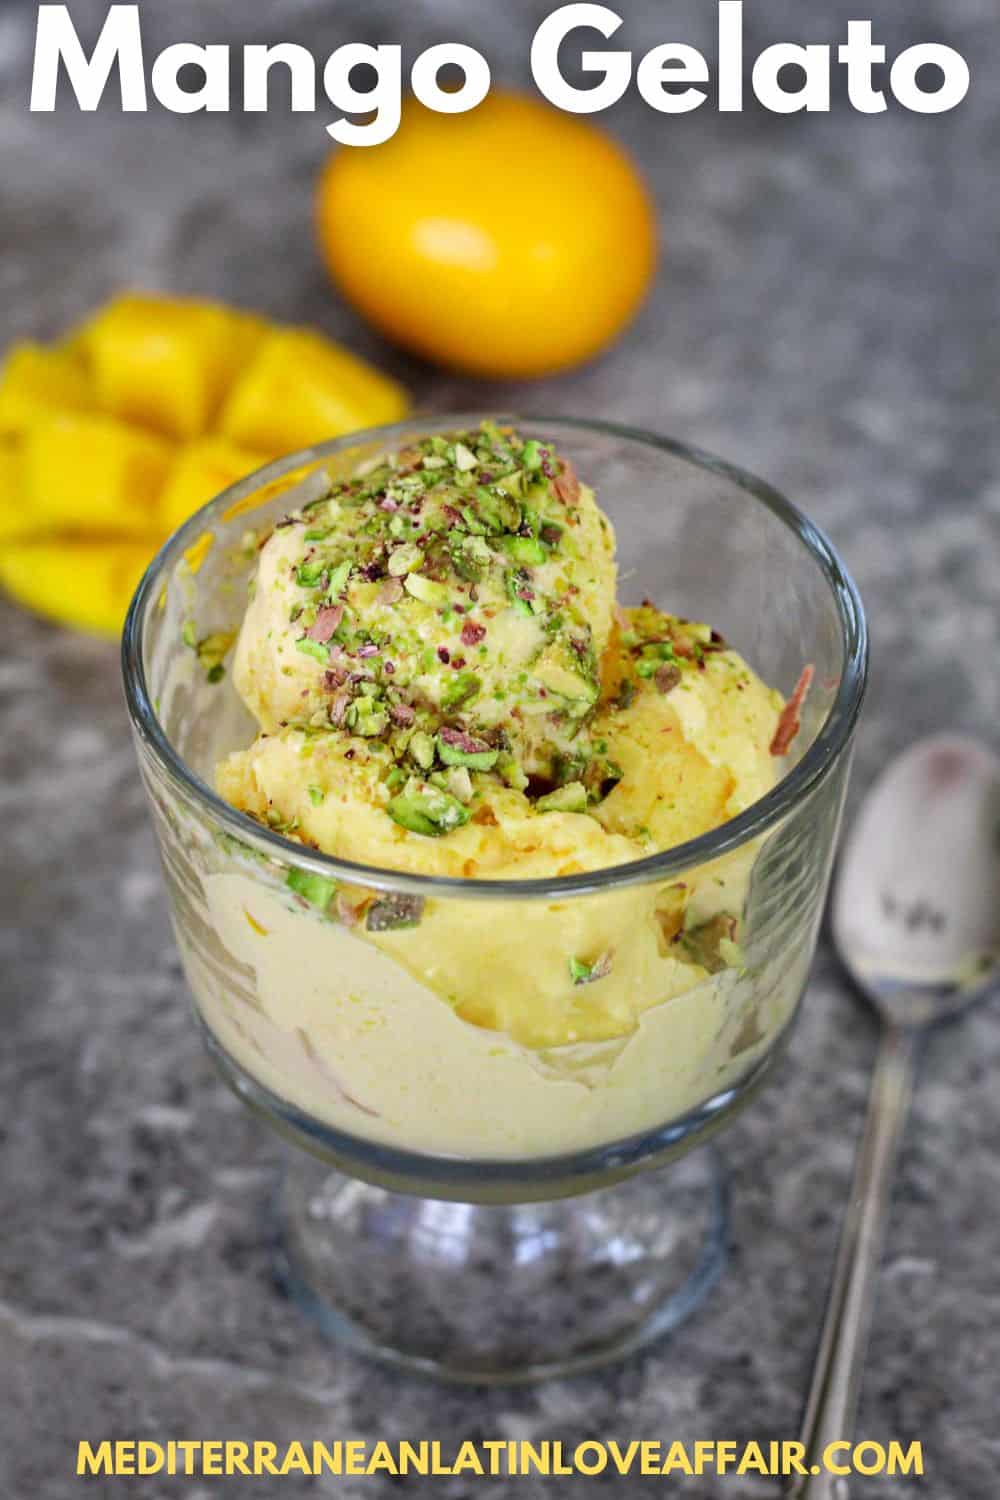 An image prepared for Pinterest, it shows a picture of a gelato serving with mango and meyer lemons. Gelato is topped with pistachios. There's a title bar on top and a website link in the bottom.